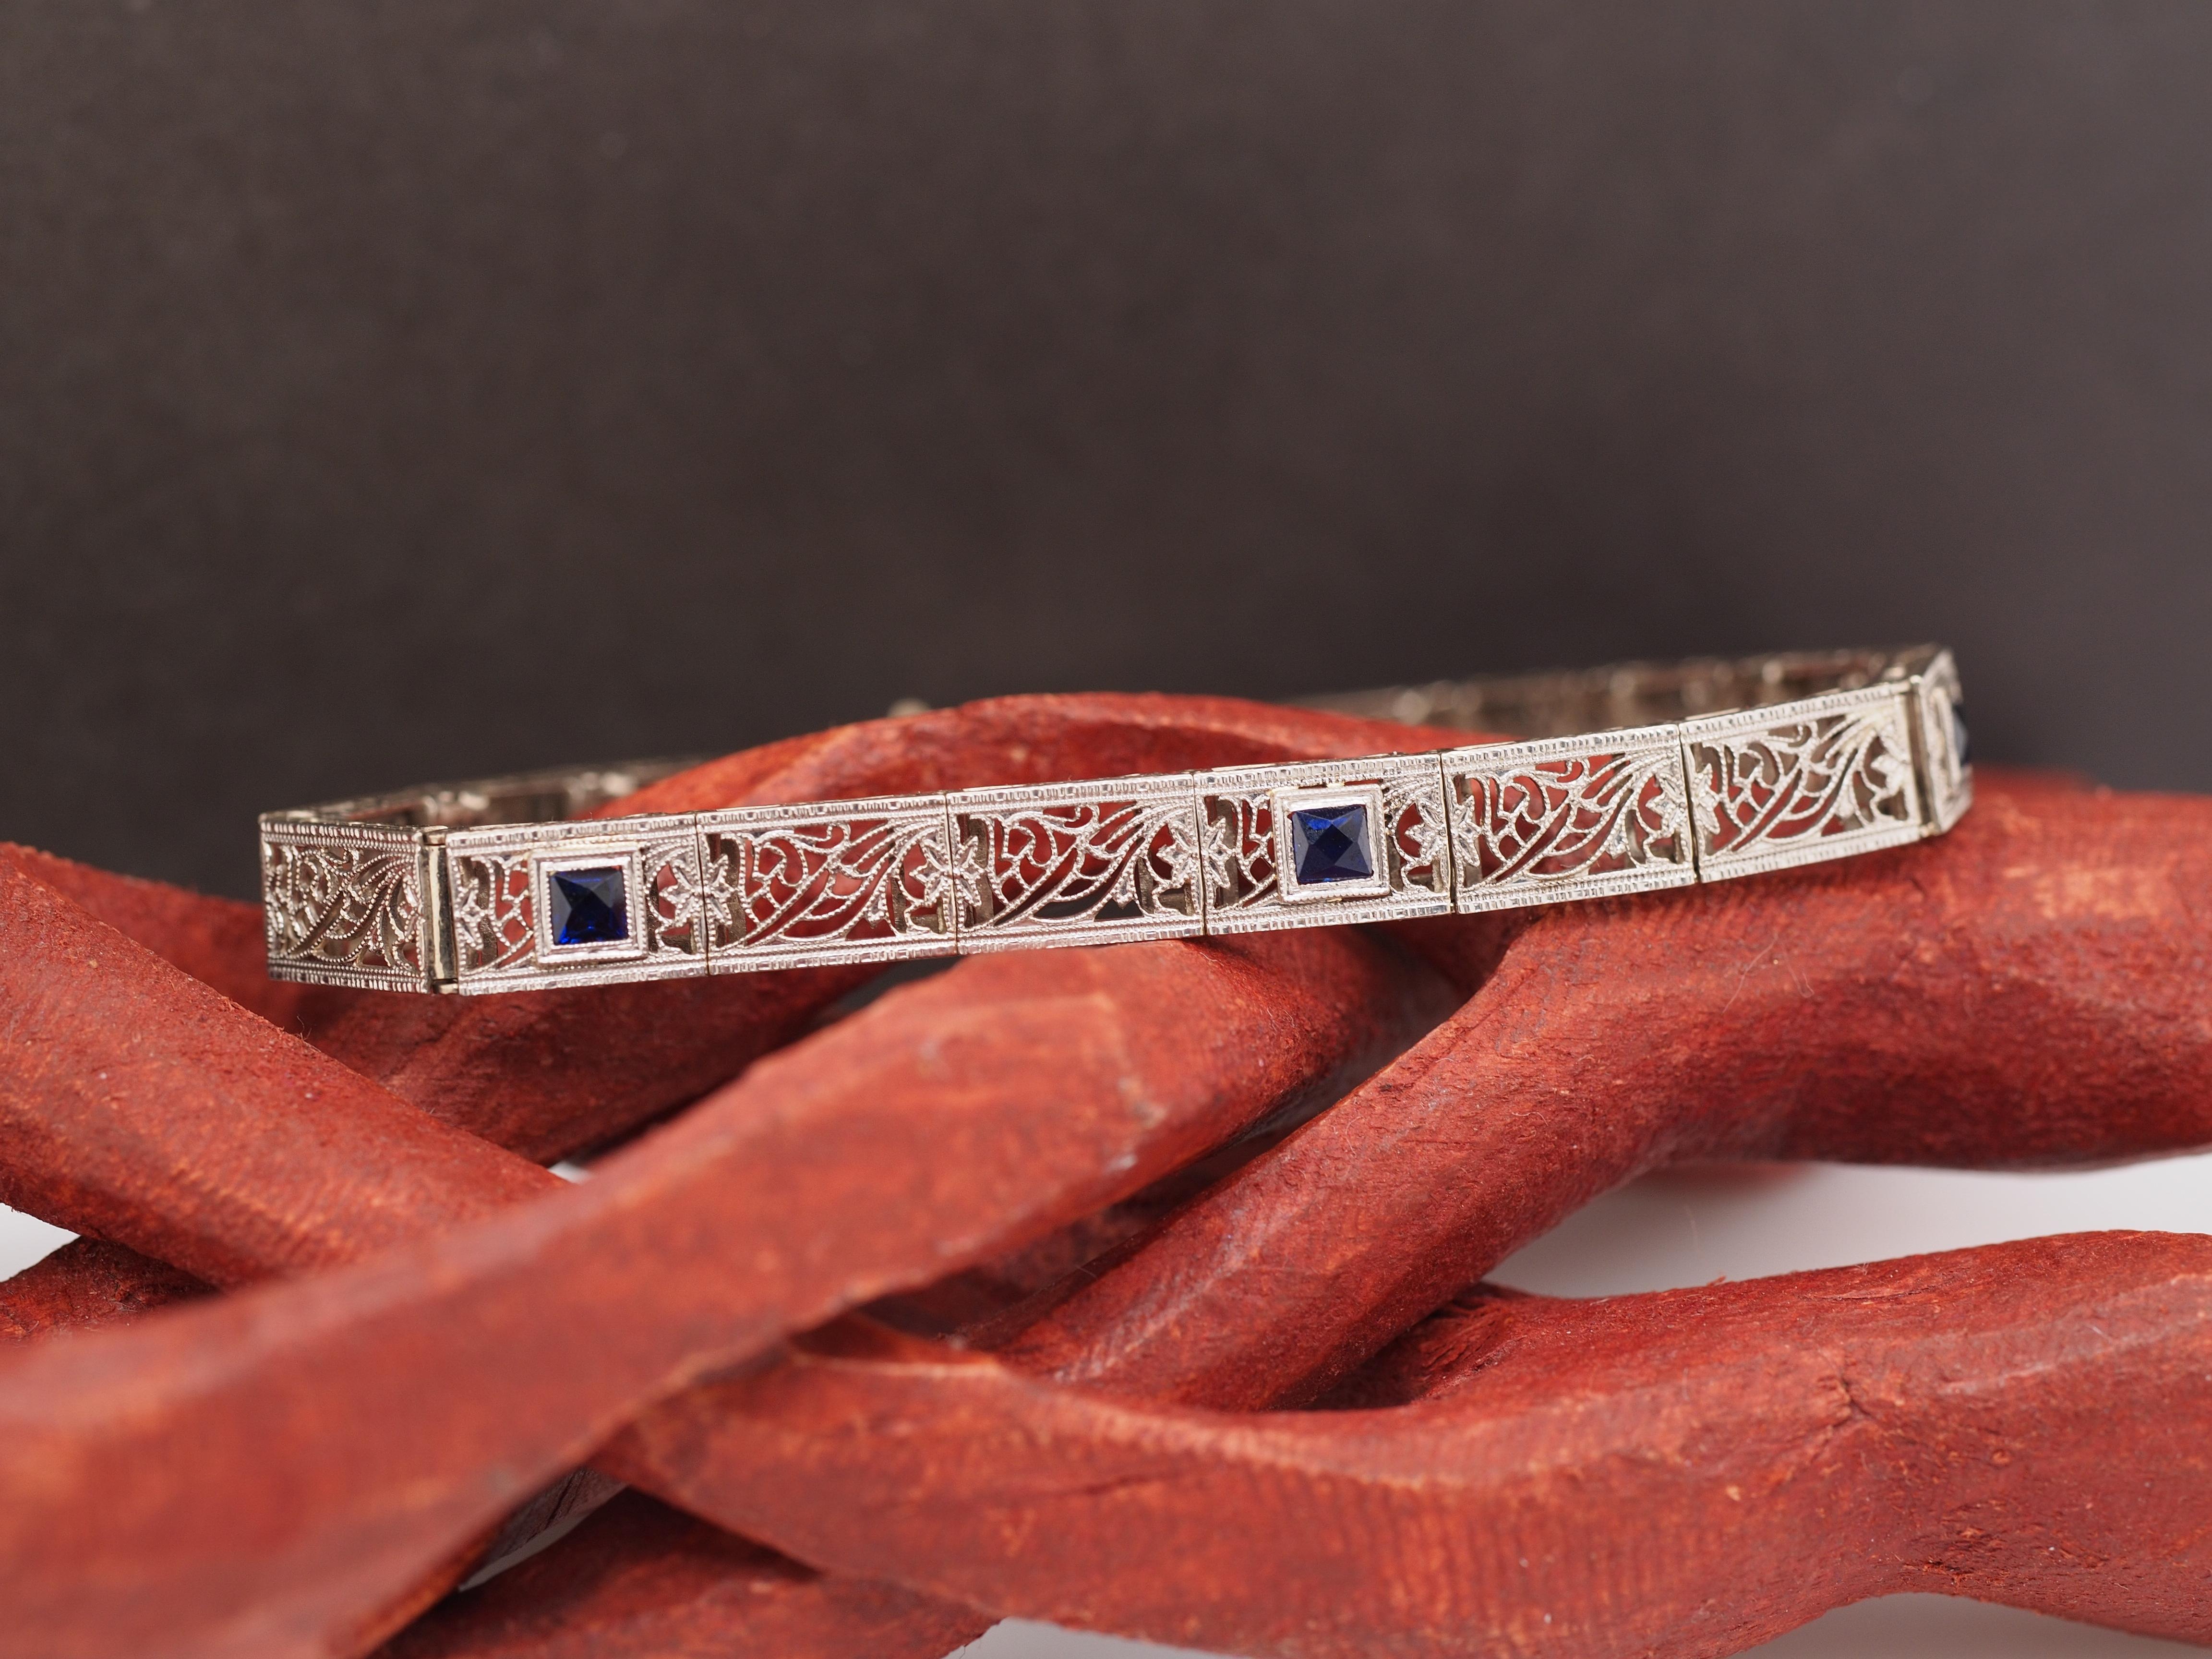 Year: 1920
Item Details:
Metal Type: 14K White Gold [Hallmarked, and Tested]
Weight: 10.1 grams (All Items Total)
Sapphire Details:
Type: synthetic
Weight: .50ct total weight
Cut: French Cut
Color: Blue

Info:

Bracelet Length Measurement: 6 Inches